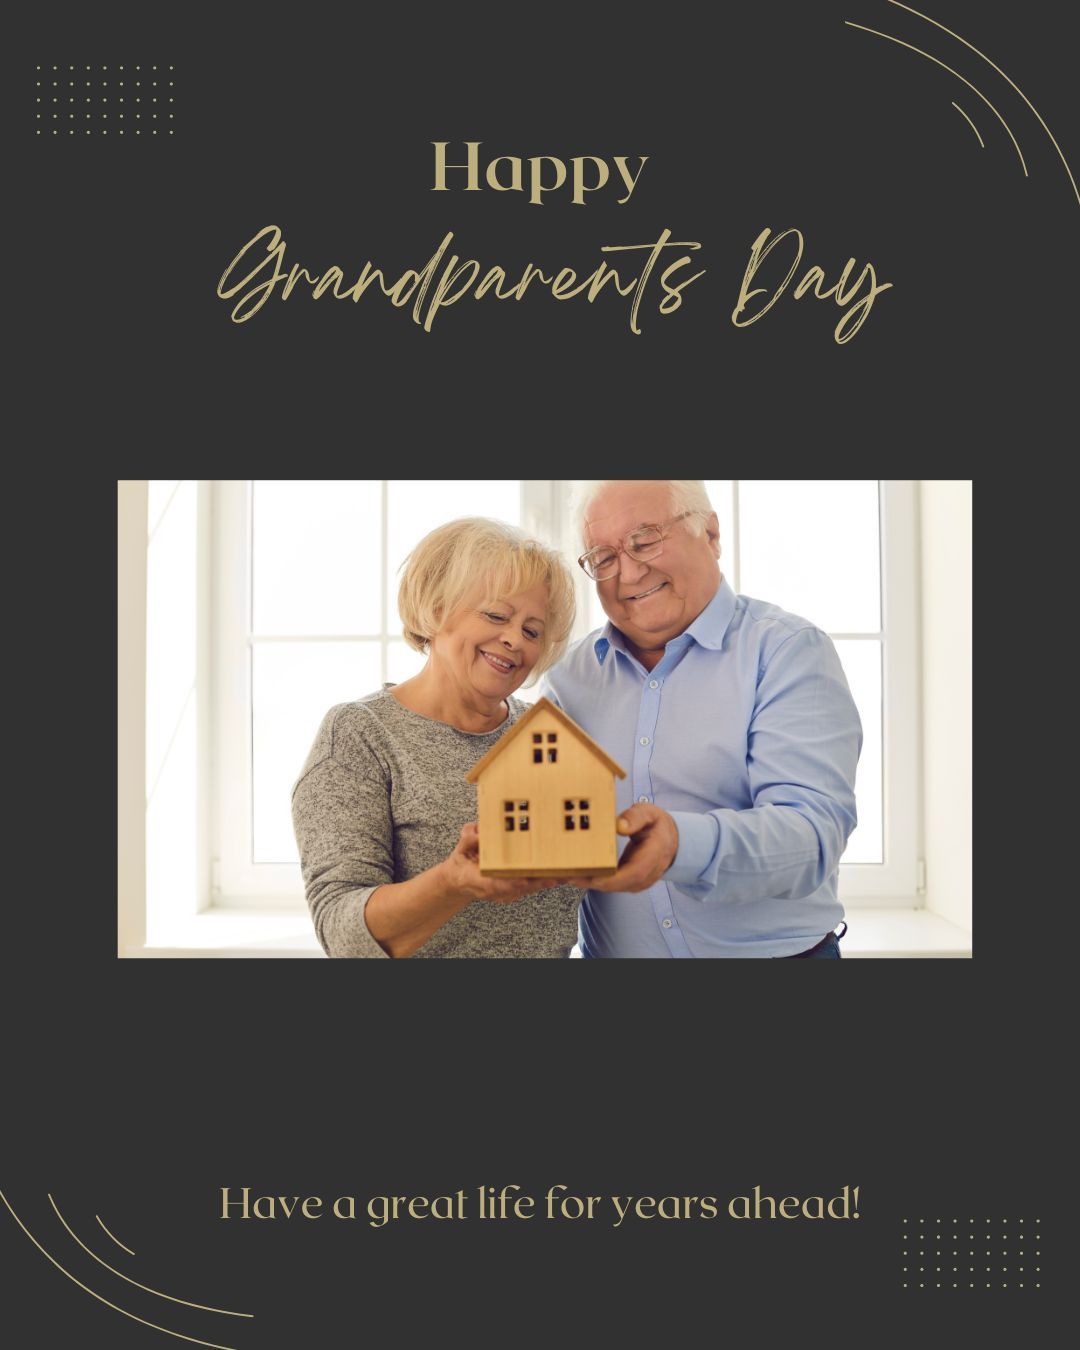 Grandparents Day messages